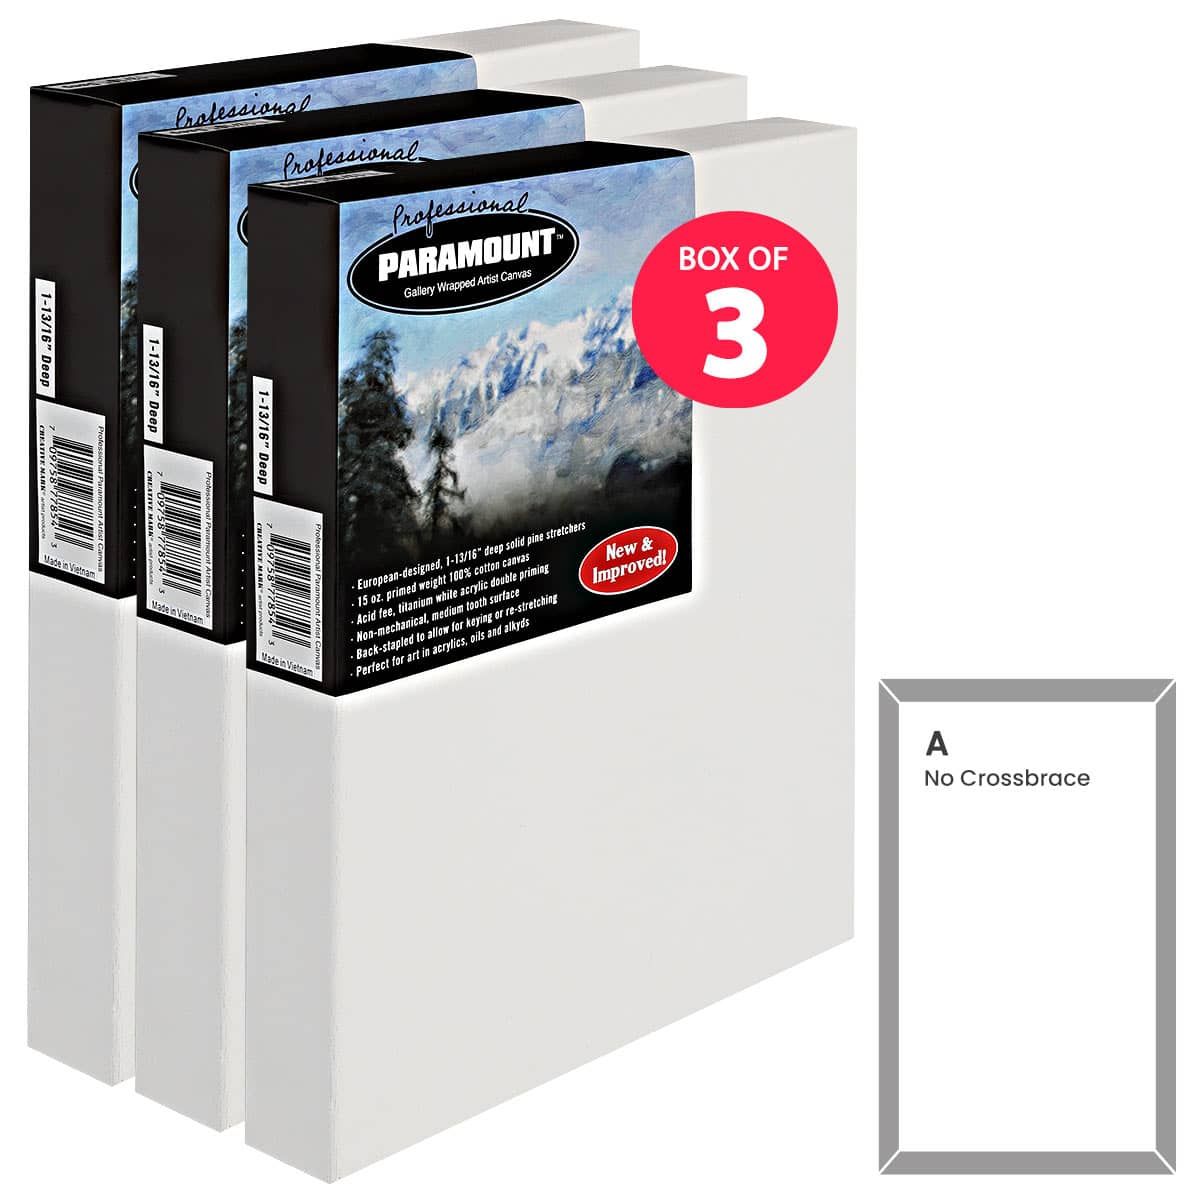 U.S. Art Supply 9 x 12 inch Gallery Depth 1-1/2 Profile Stretched Canvas, 4-Pack - 12-Ounce Acrylic Gesso Triple Primed, Professional Artist